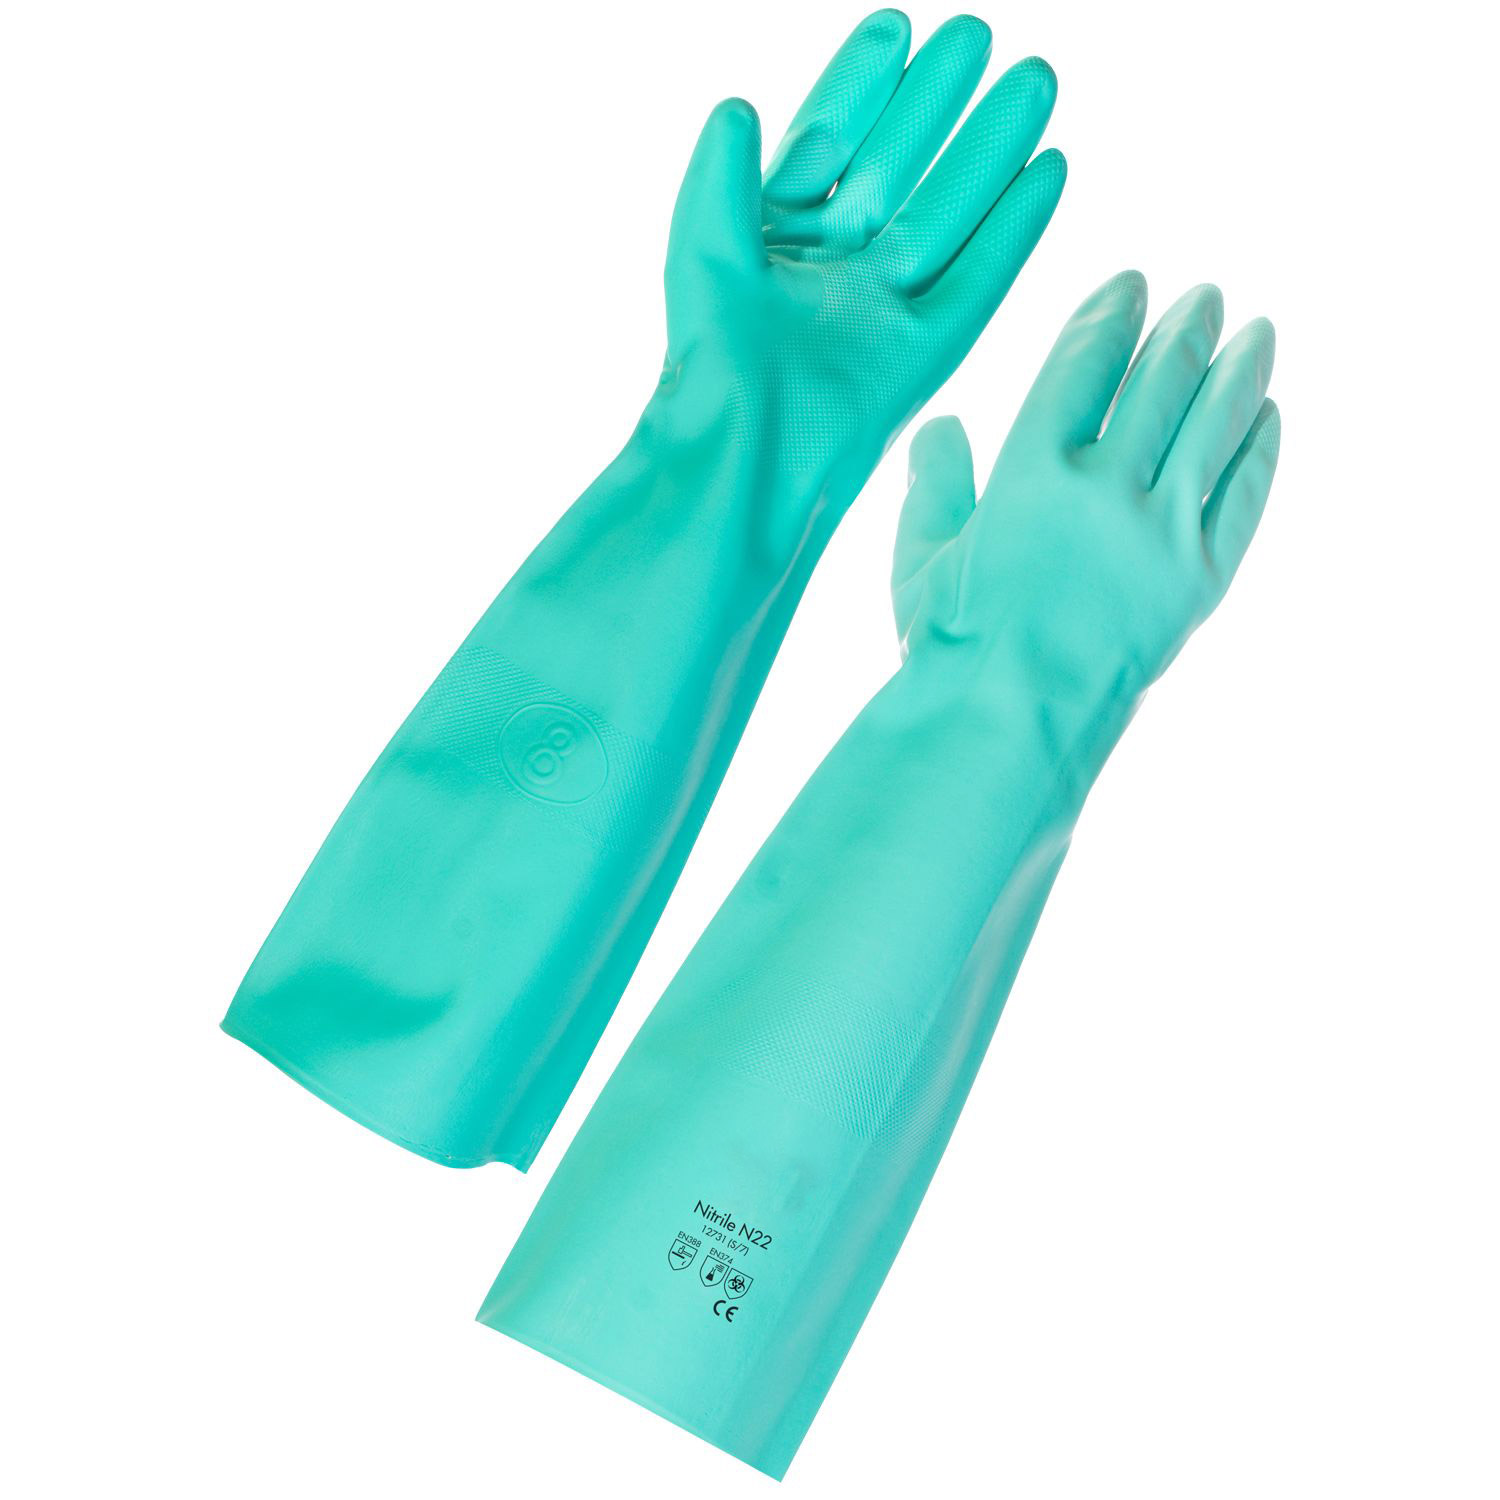 Long Length Tough Chemical Resistant Industrial Nitrile Gloves